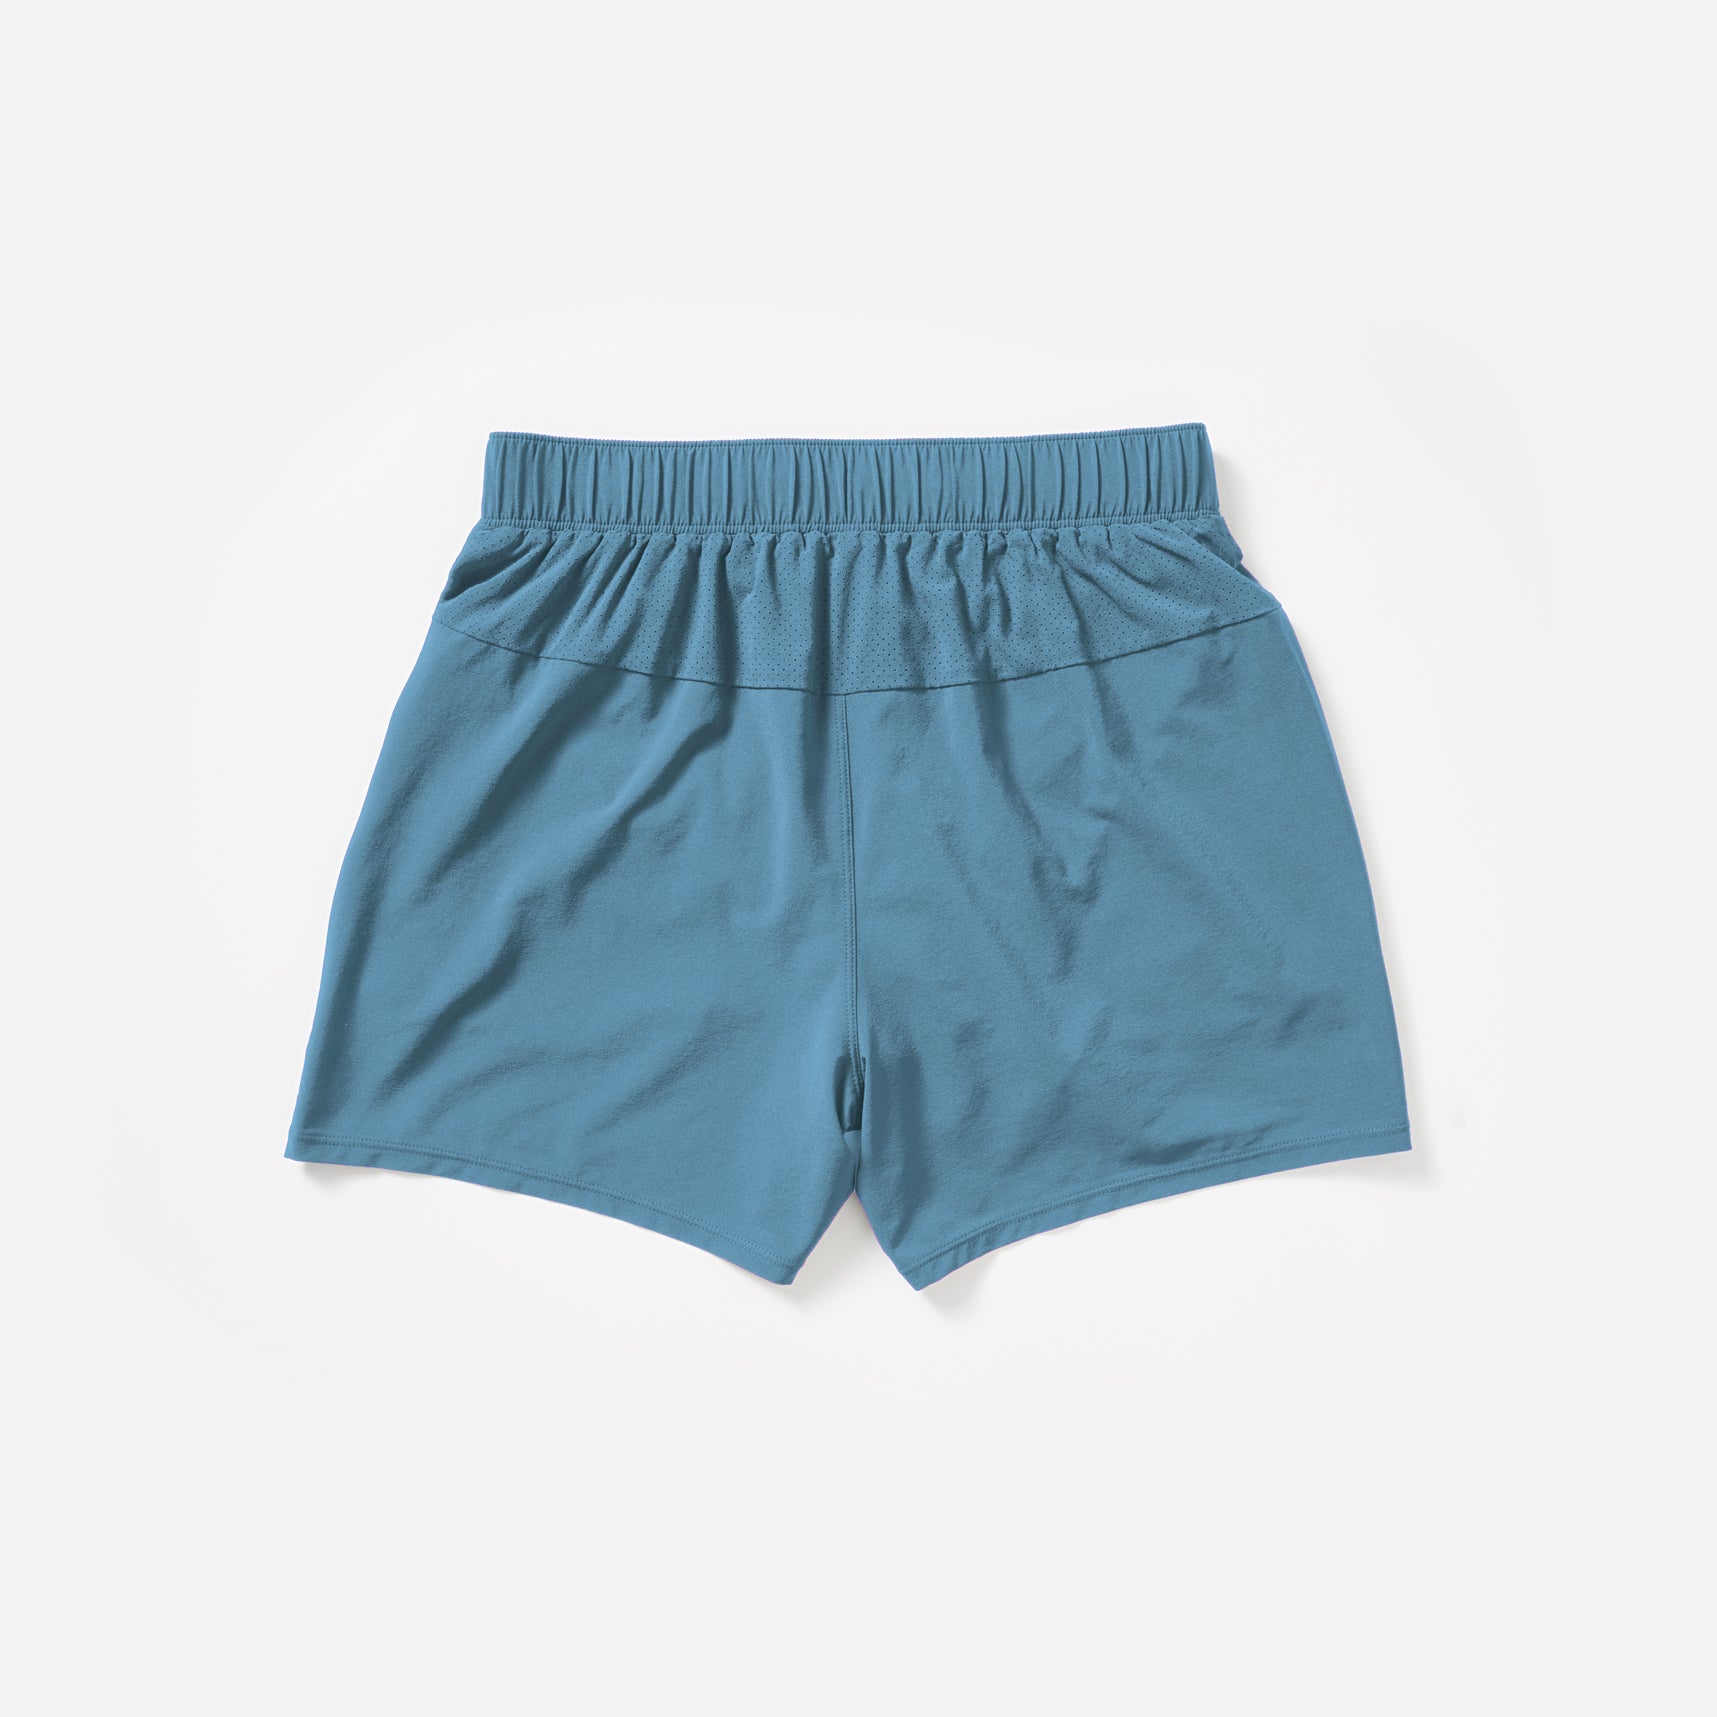 Quad Short 2.0 Lined / Unlined